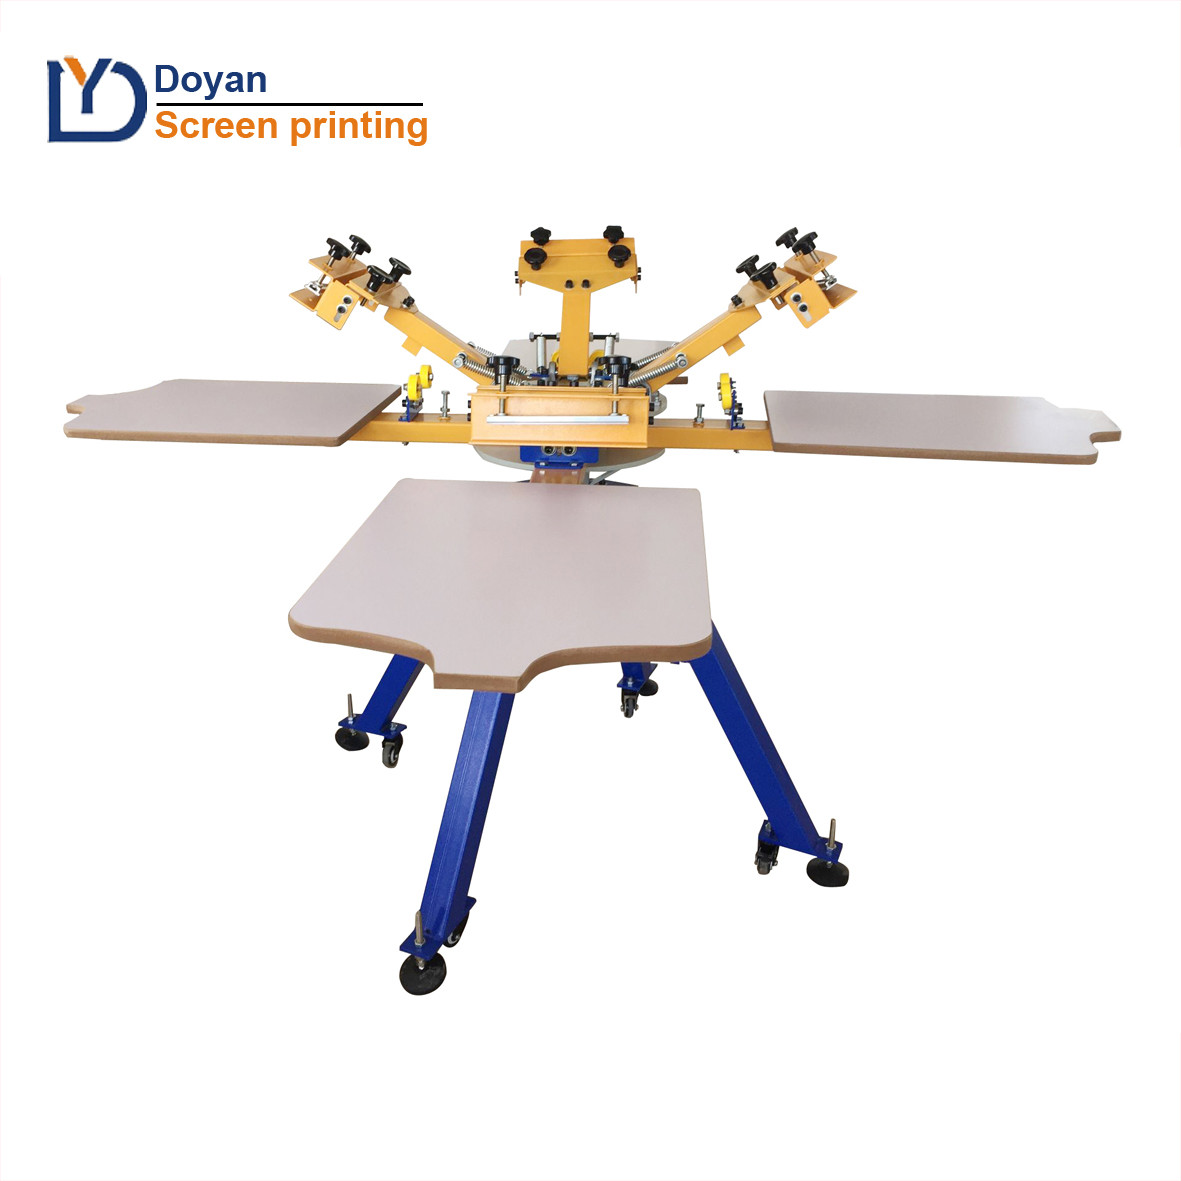 What are the categories of Screen Printing Machine?